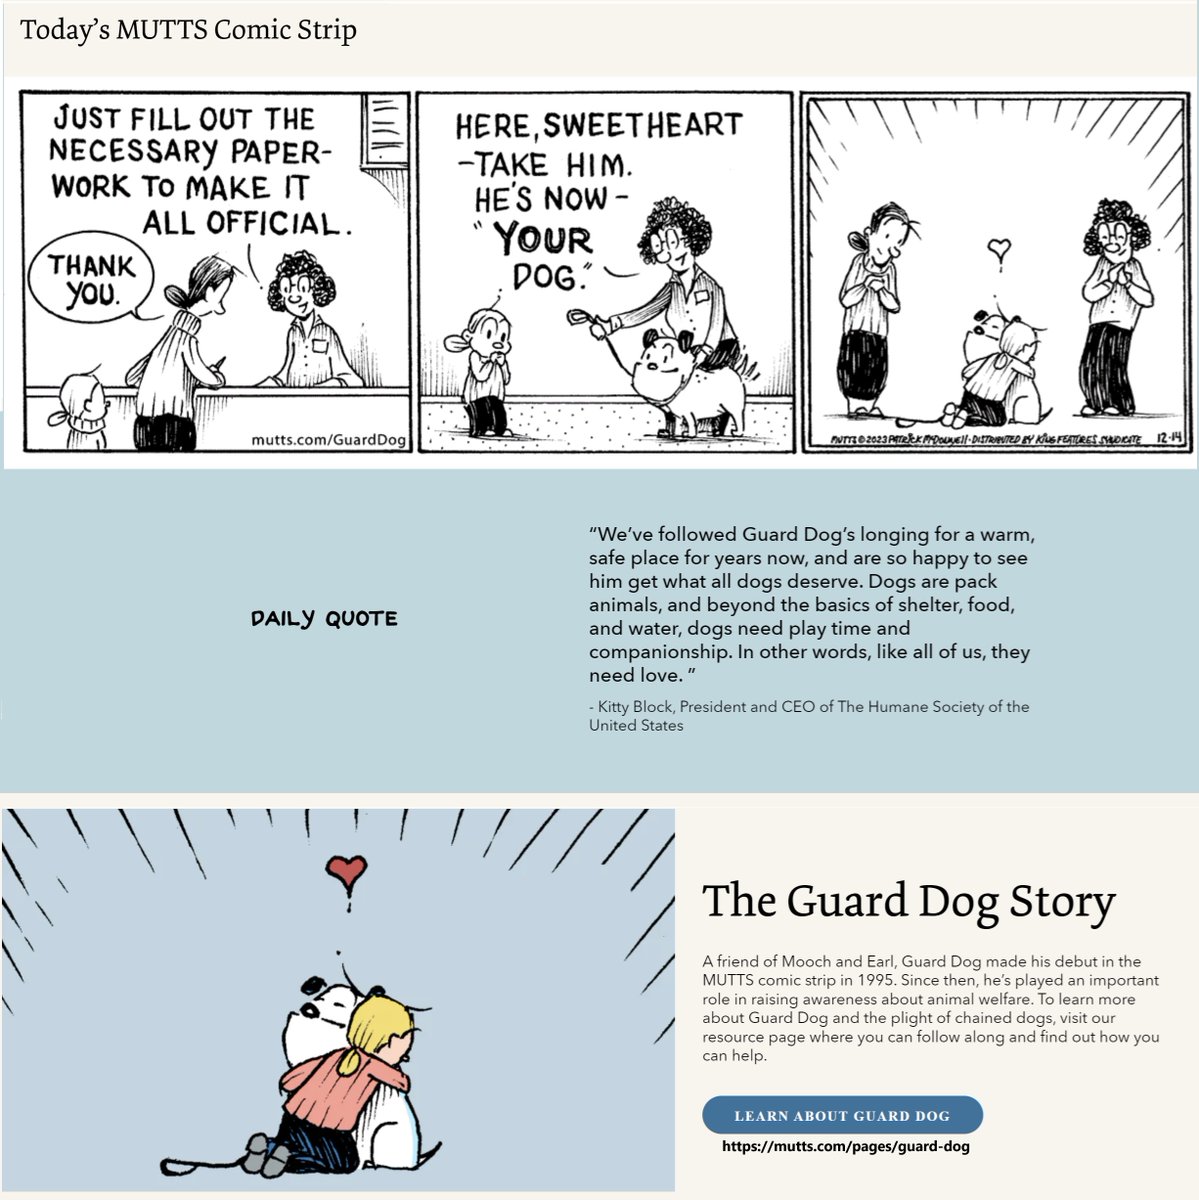 The moment we and #GuardDog have been waiting for! It finally comes to us today from @muttscomics , with a beautiful quote from the president of the @HumaneSociety  of the United States, about the need for love shared by all of us. #adoptdontshop